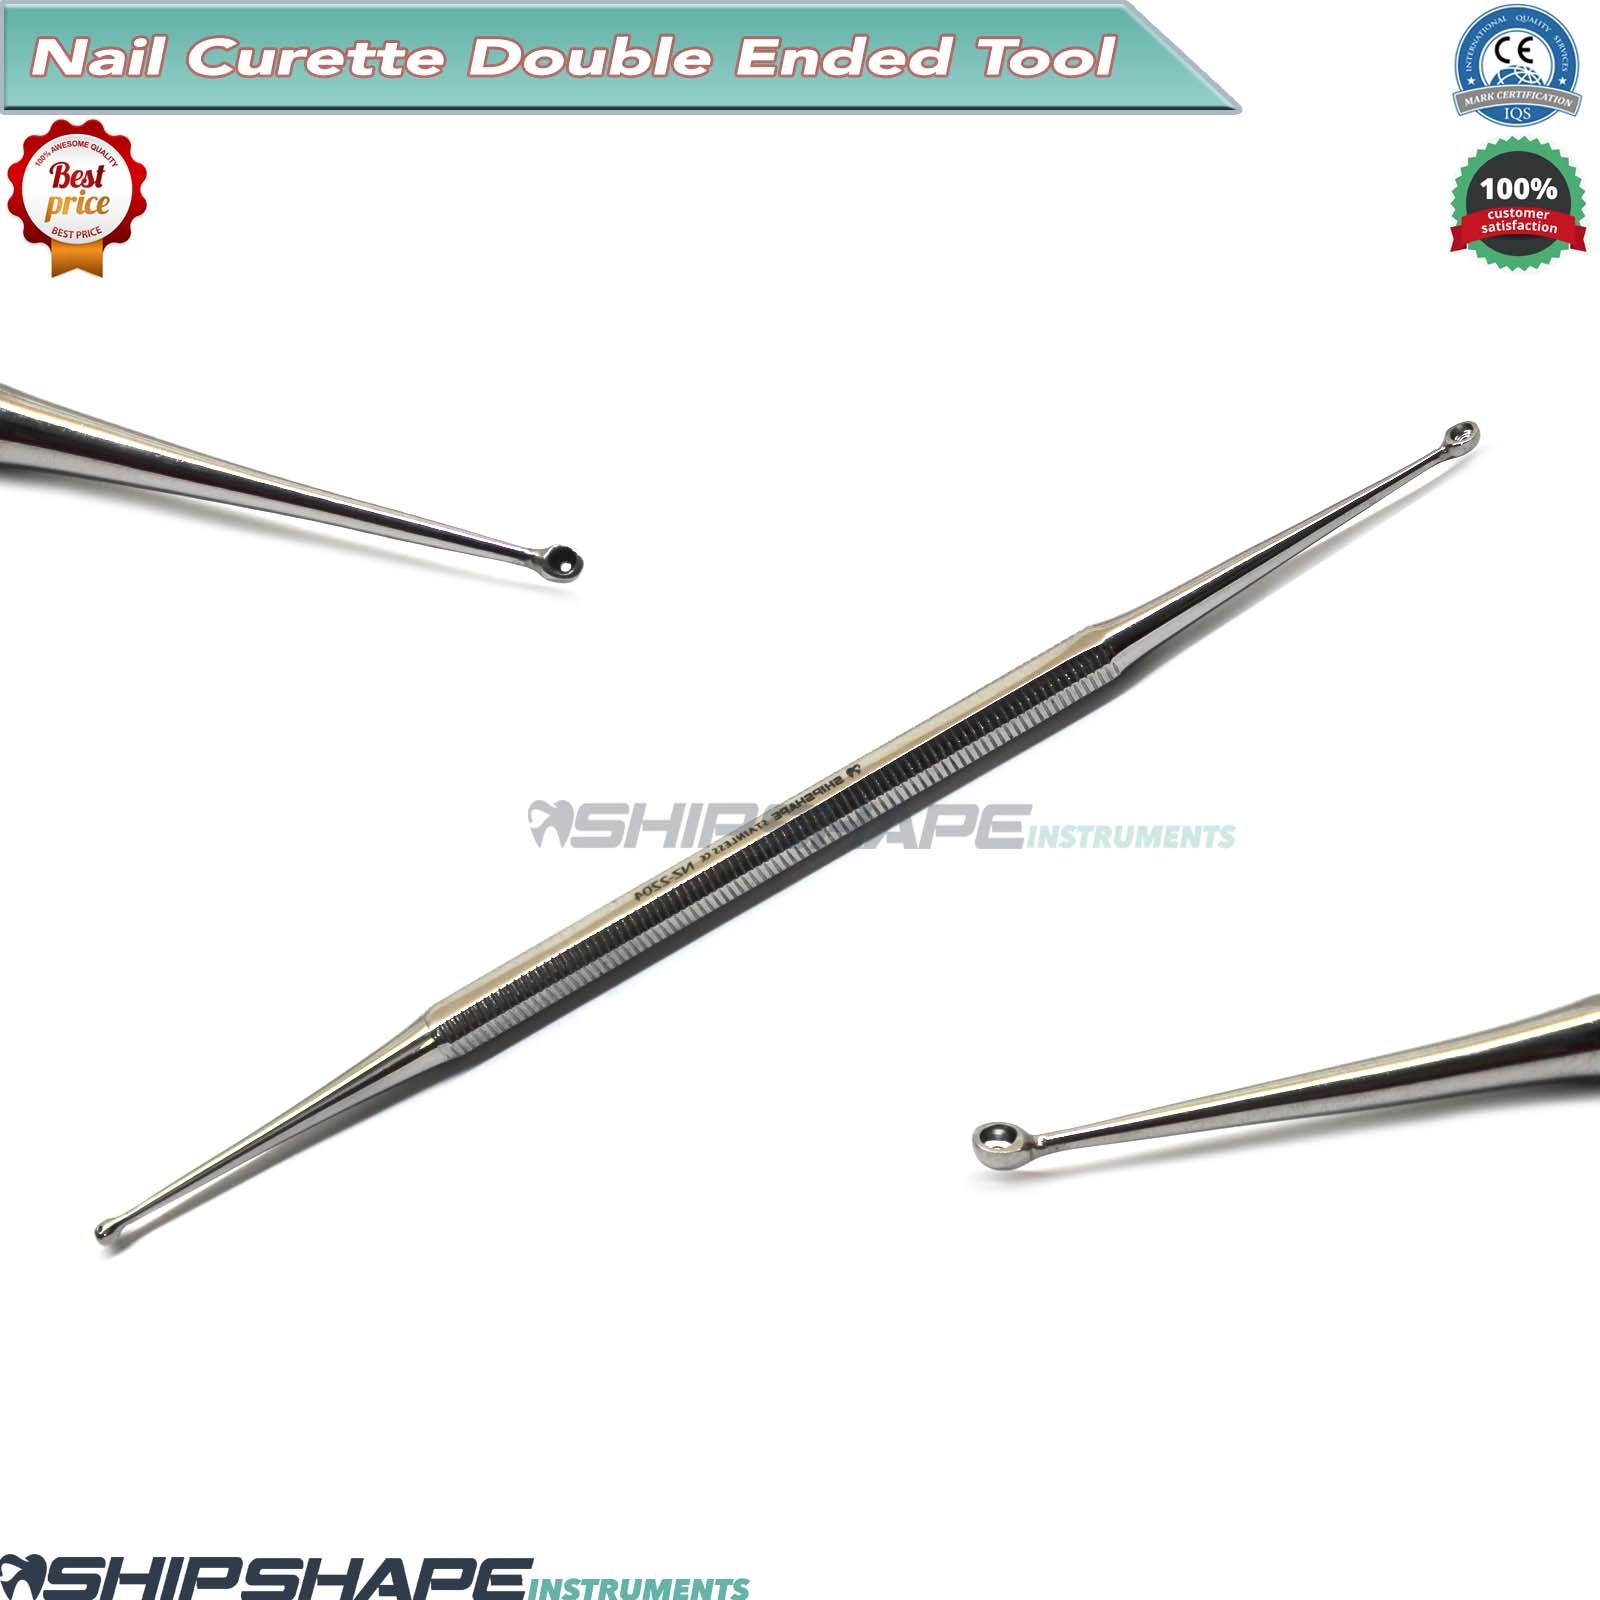 Nail Cleaner Nail Curette Manicure Pedicure Tool-1840